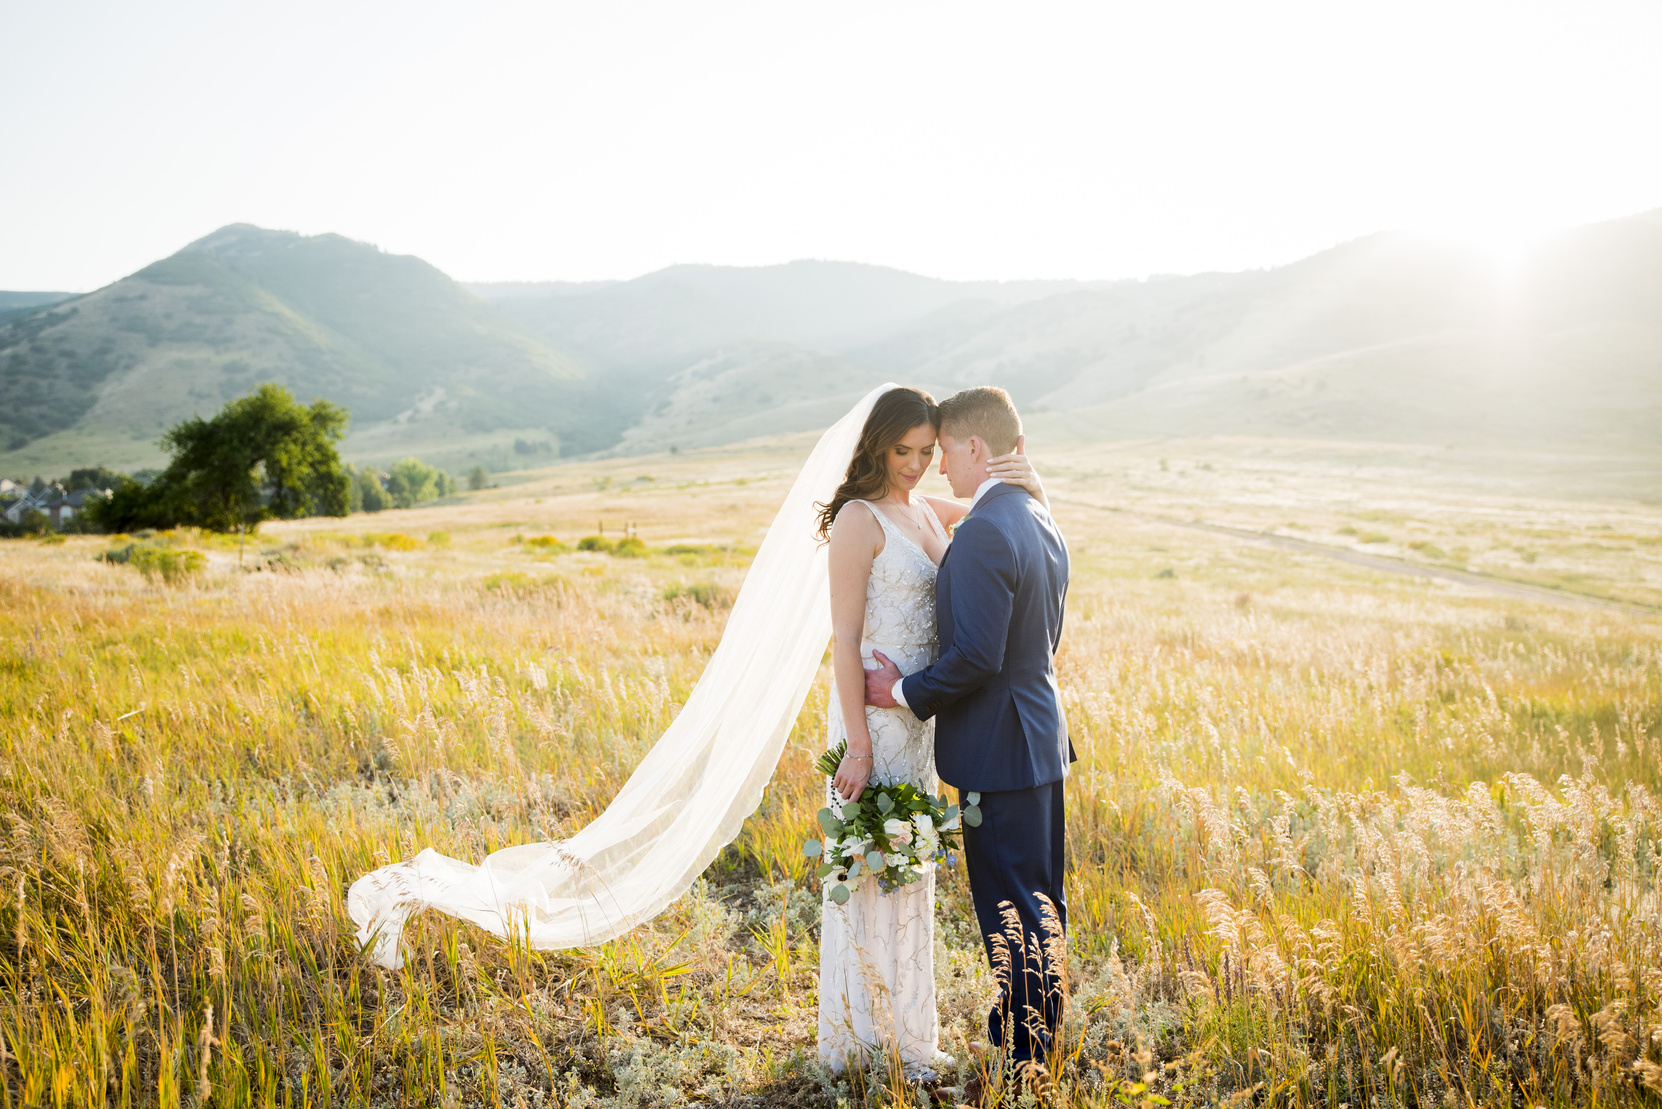 The bride and groom are standing in a field of tall grass with the sun shining down on them and the mountains in the background.